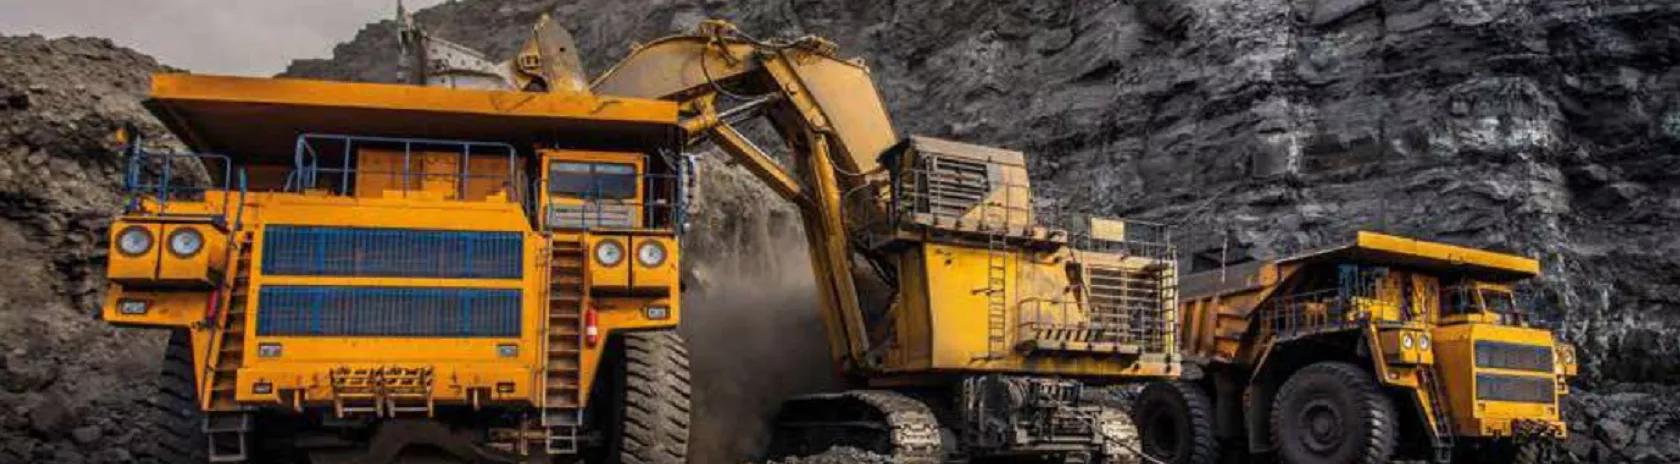 Construction and mining vehicles